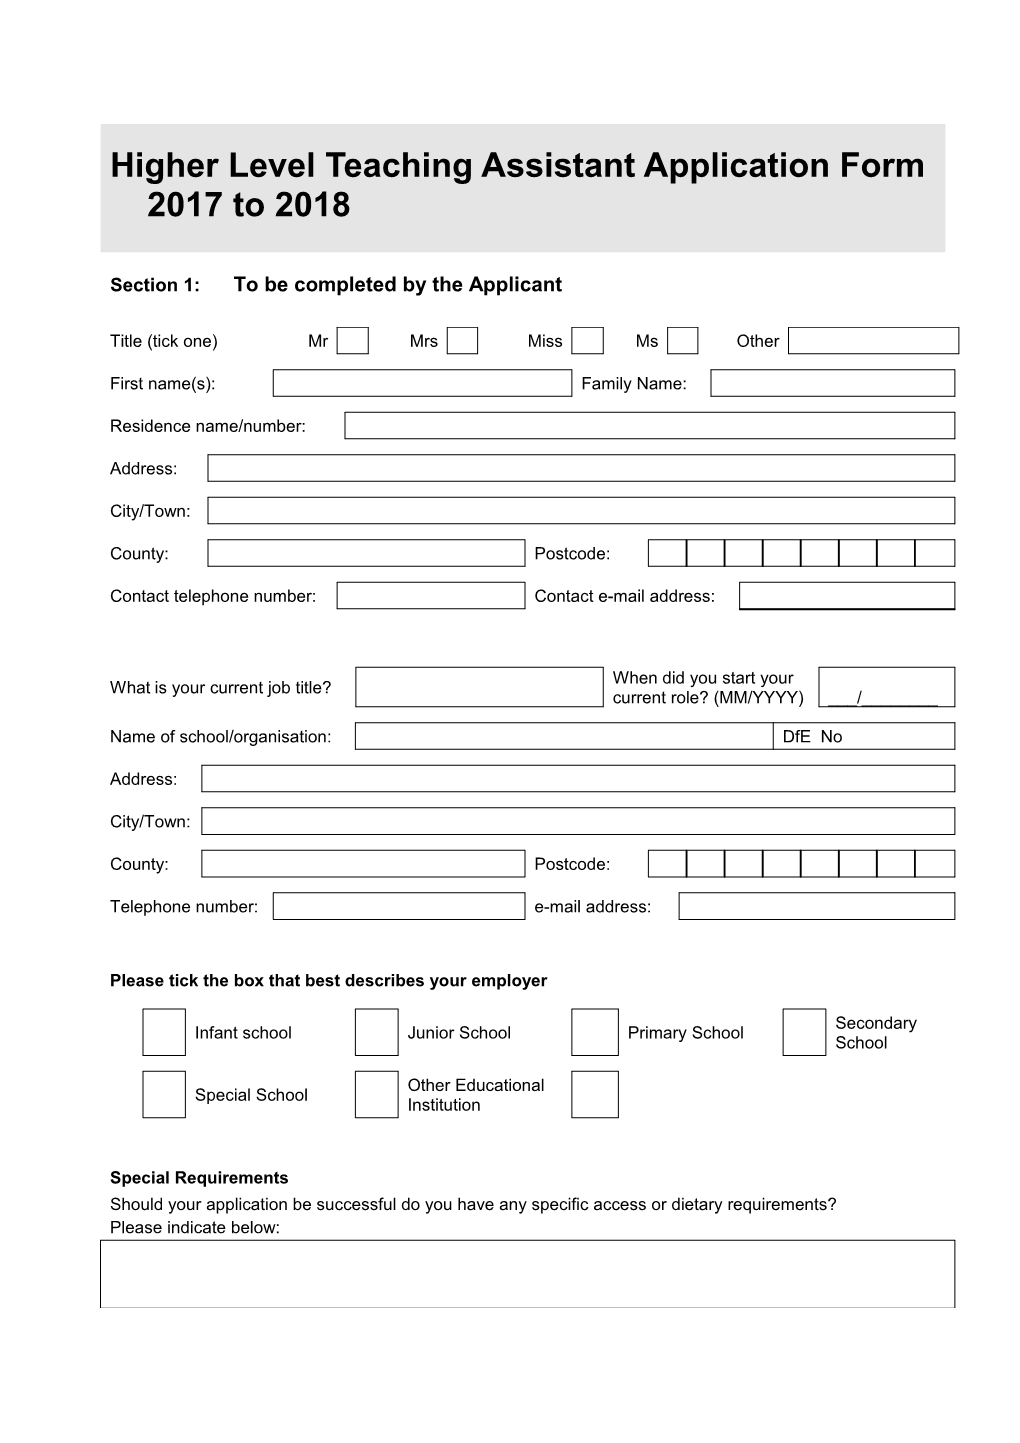 Higher Level Teaching Assistant Funding Application Form 2007/8